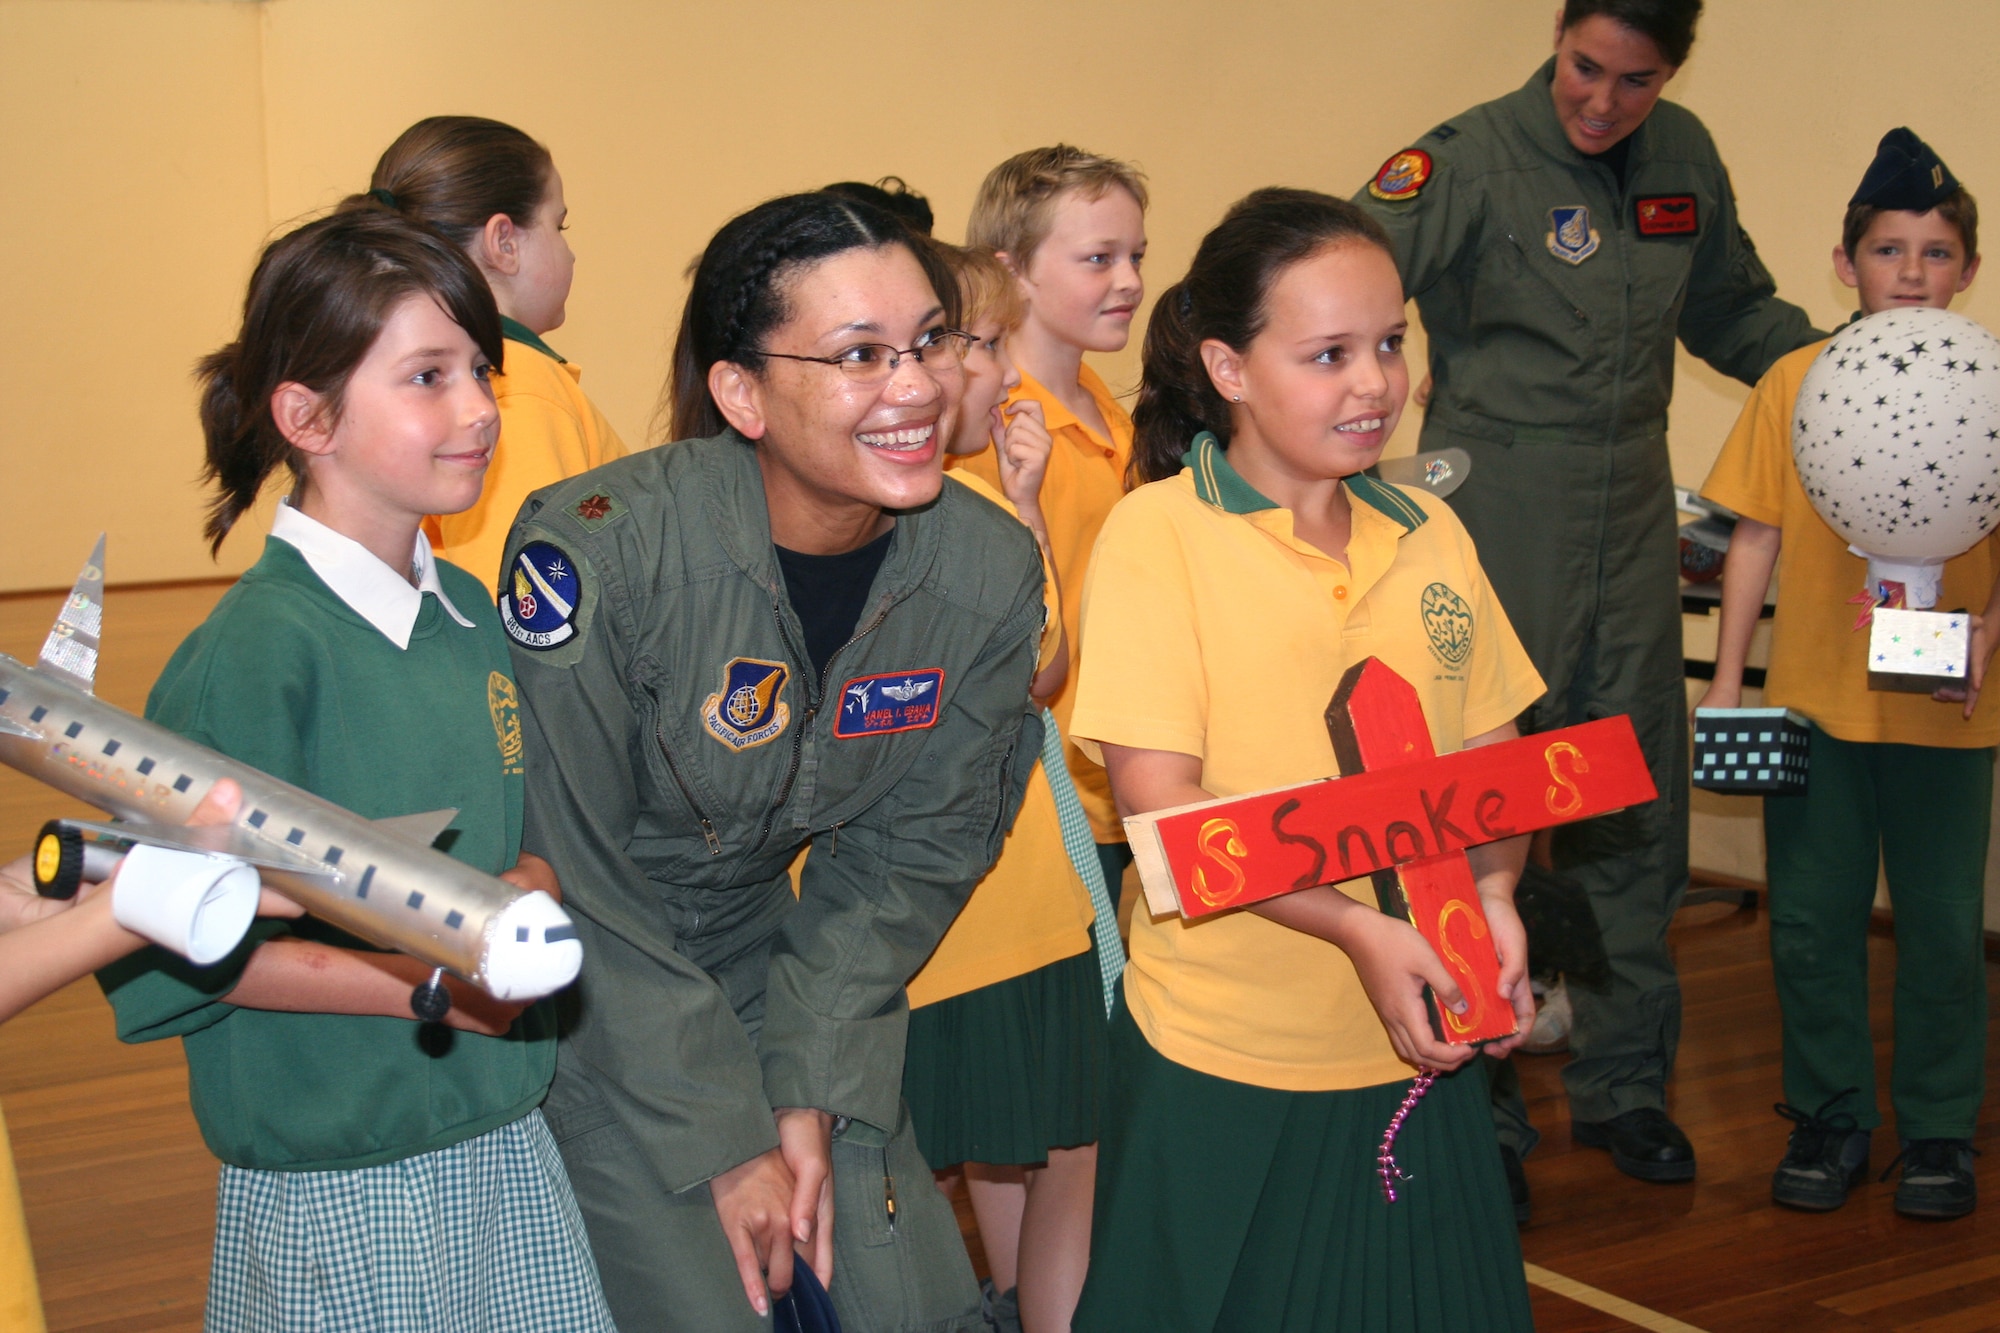 Maj. Janel Egana, air surveillance officer with the 961st Airborne Air Control Squadron, Kadena Air Base, Japan, poses with students from the Lara Primary School, Lara, Victoria, Australia. Major Egana and other Pacific Air Forces Airmen visited the school Thursday to speak to students about being in the U.S. Air Force. The Airmen are in Australia supporting Australian International Airshow 07.  (U.S. Air Force photo/Capt. Yvonne Levardi)